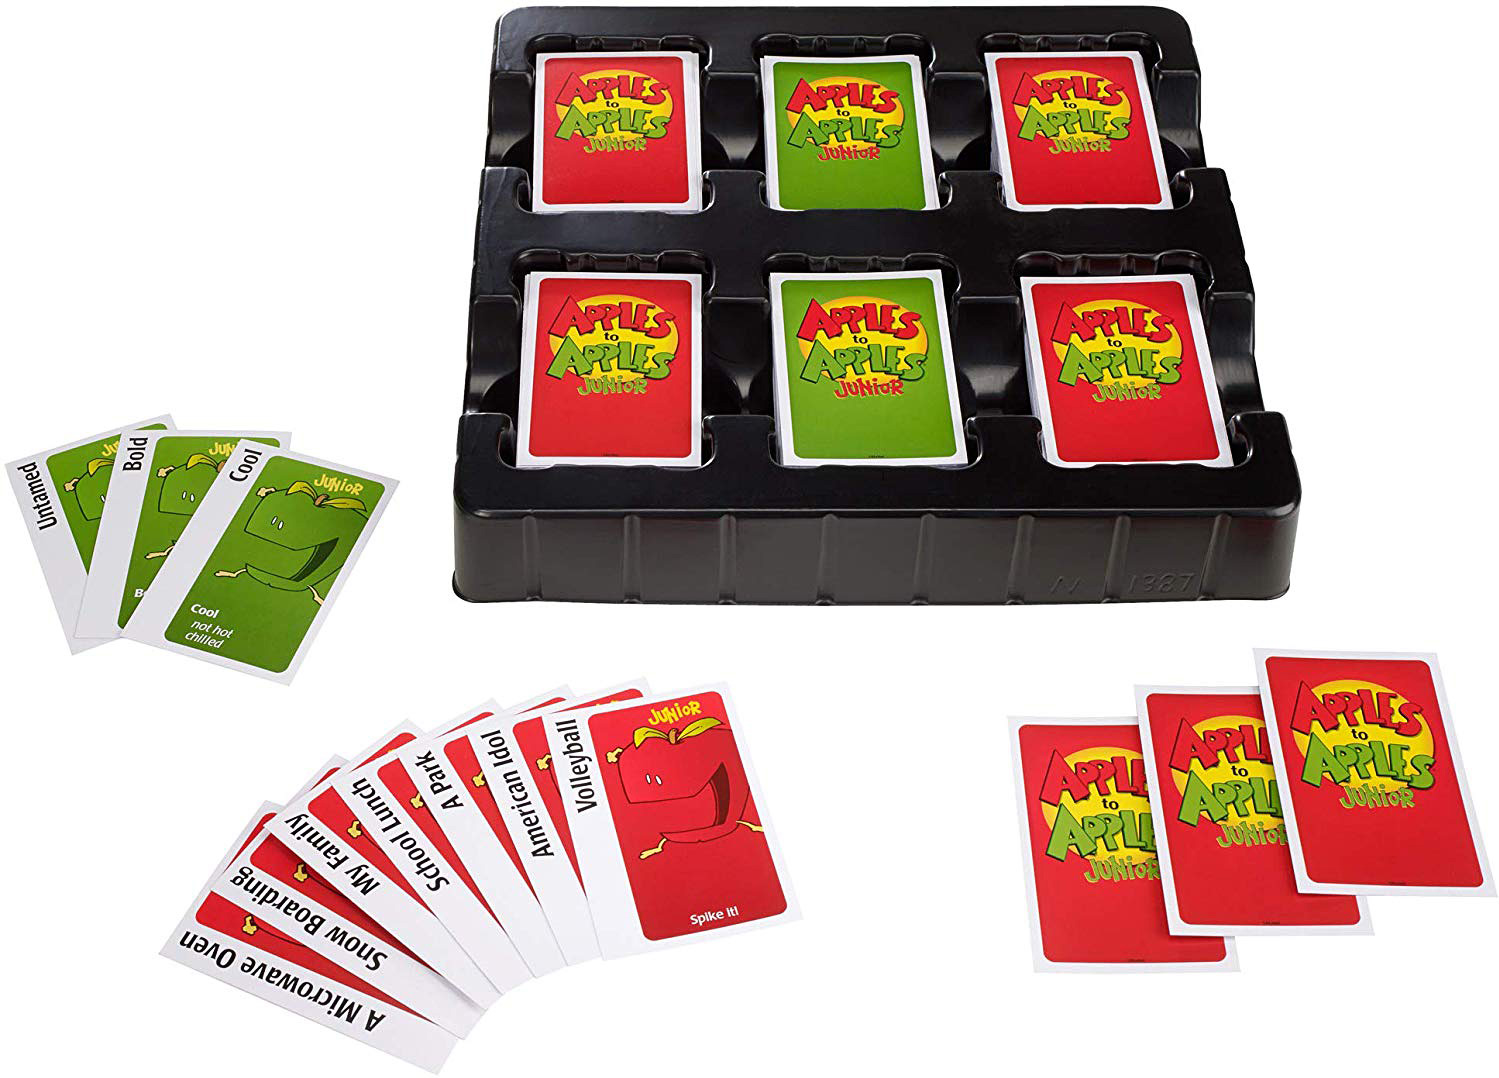 Mattel Games Apples to Apples Junior N1387 for sale online The Game of Crazy Comparisons Card Game 